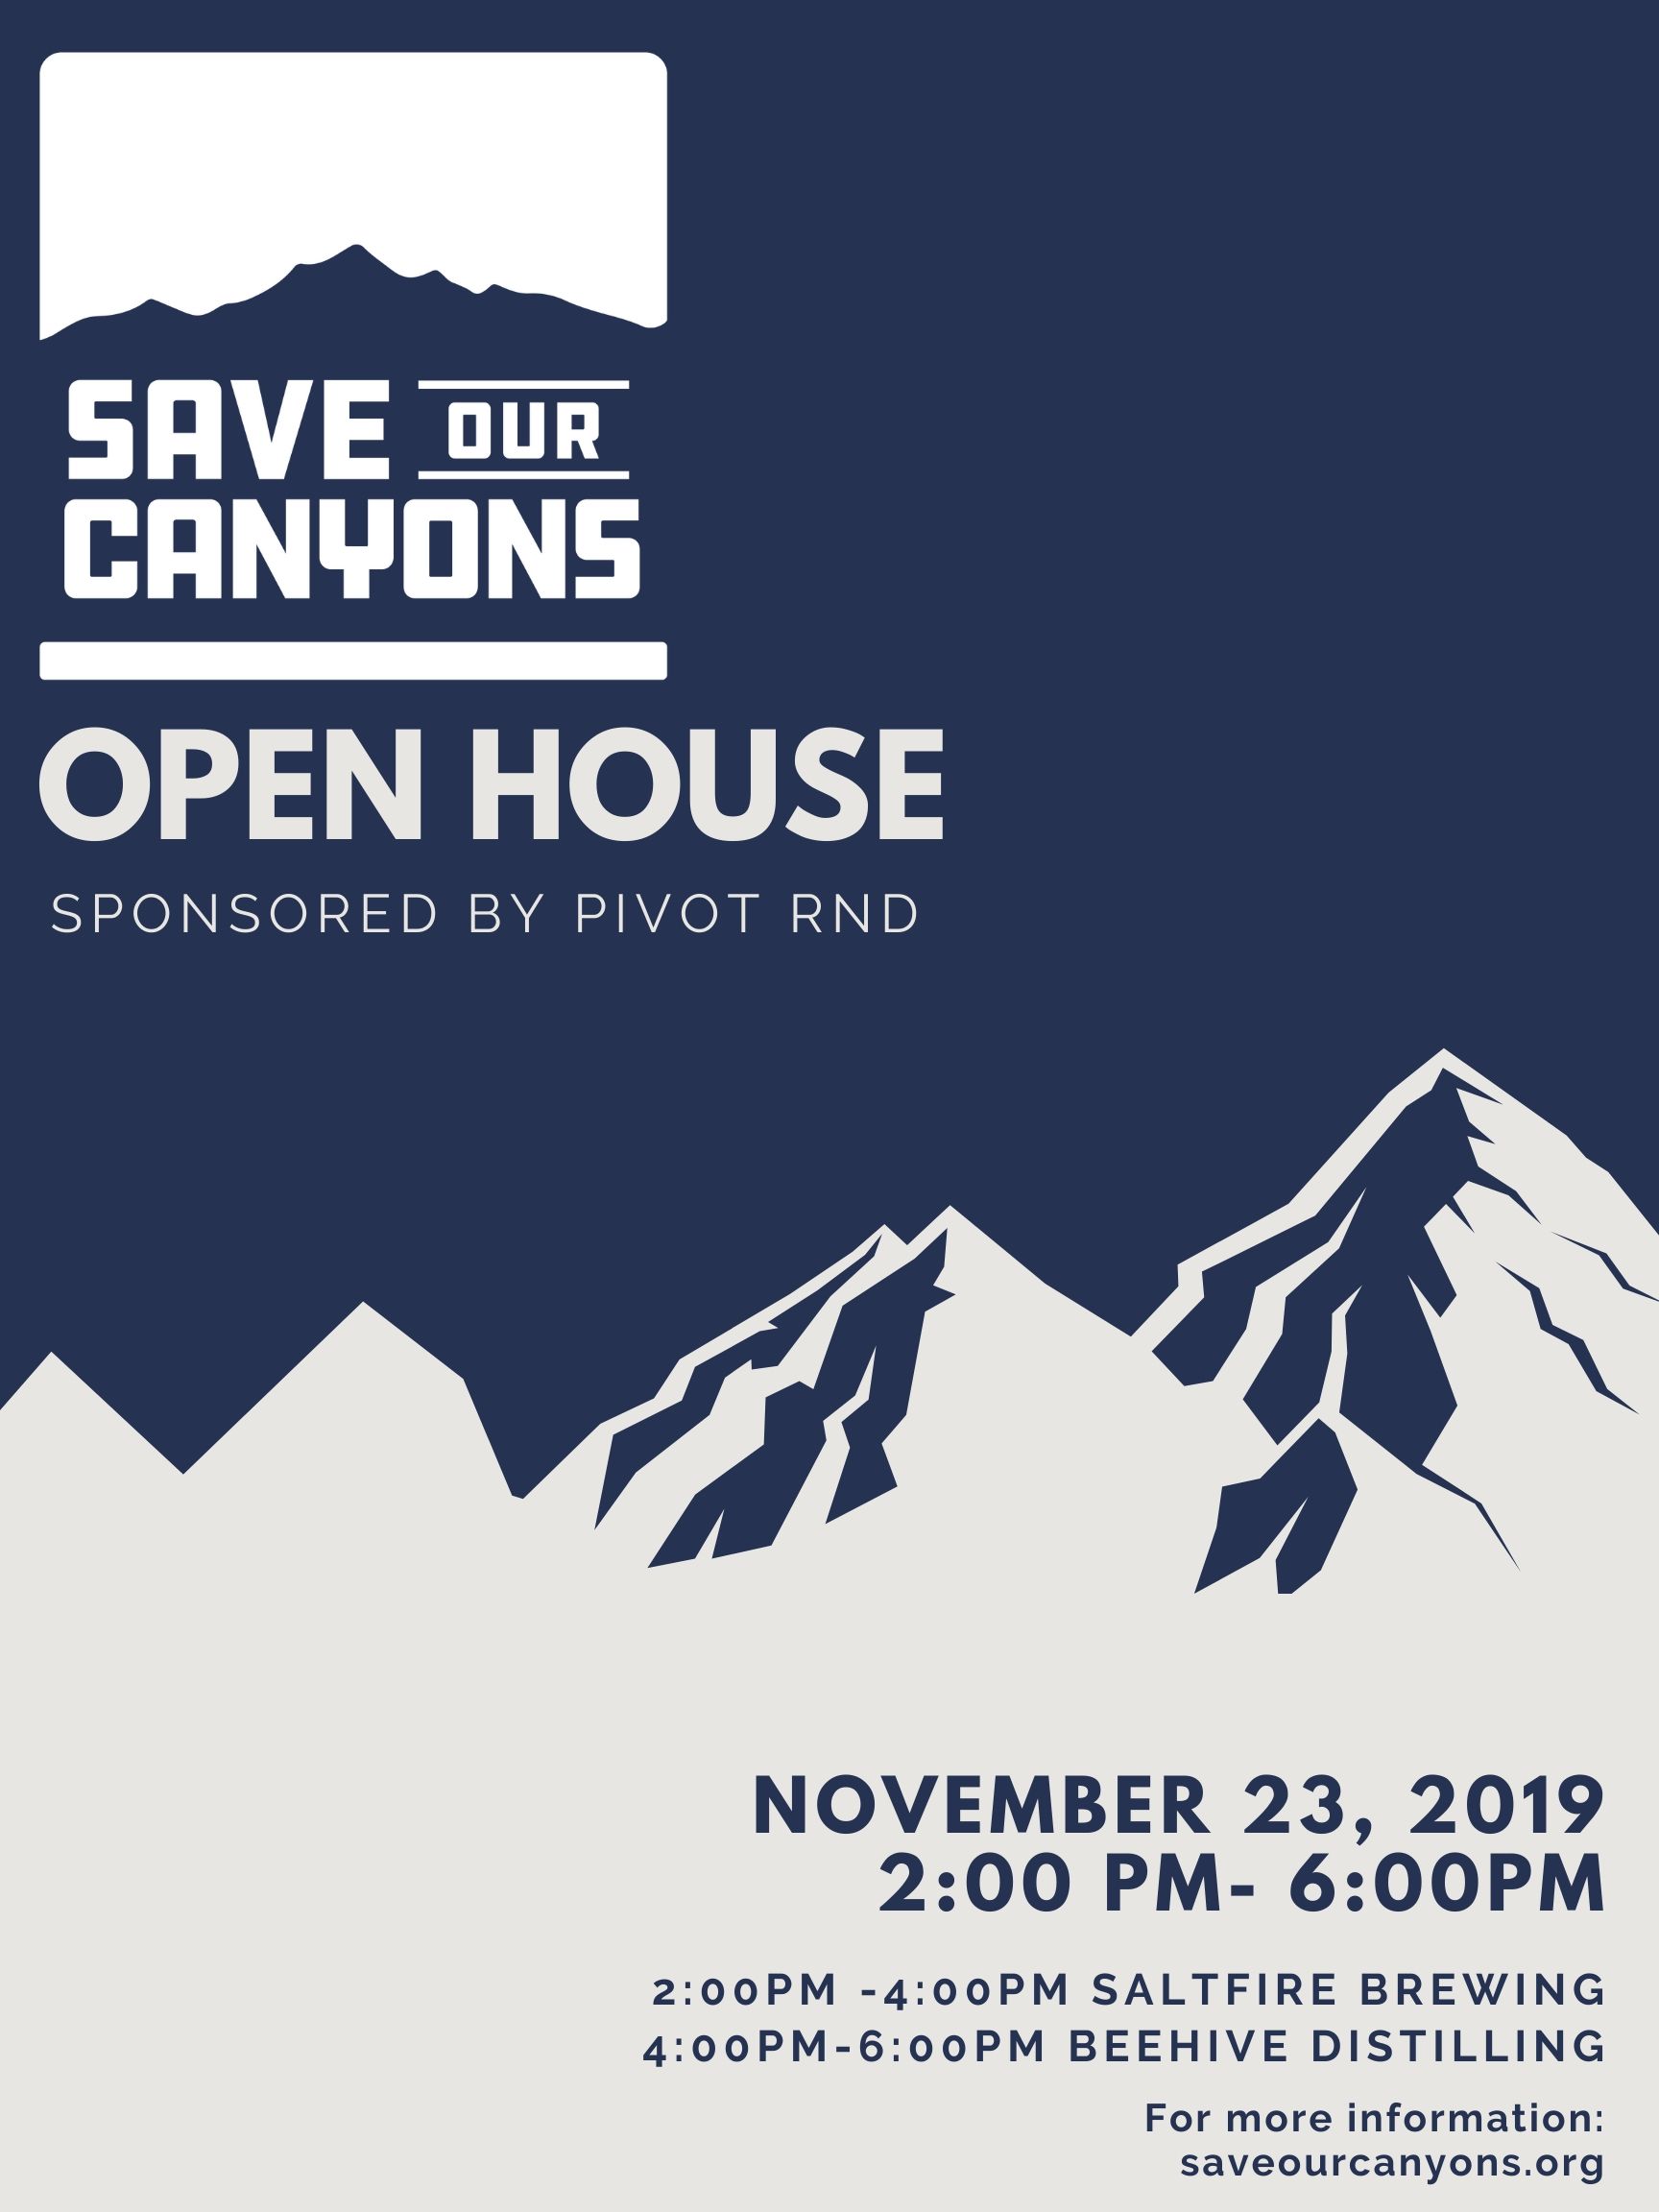 SAVE OUR CANYONS OPEN HOUSE